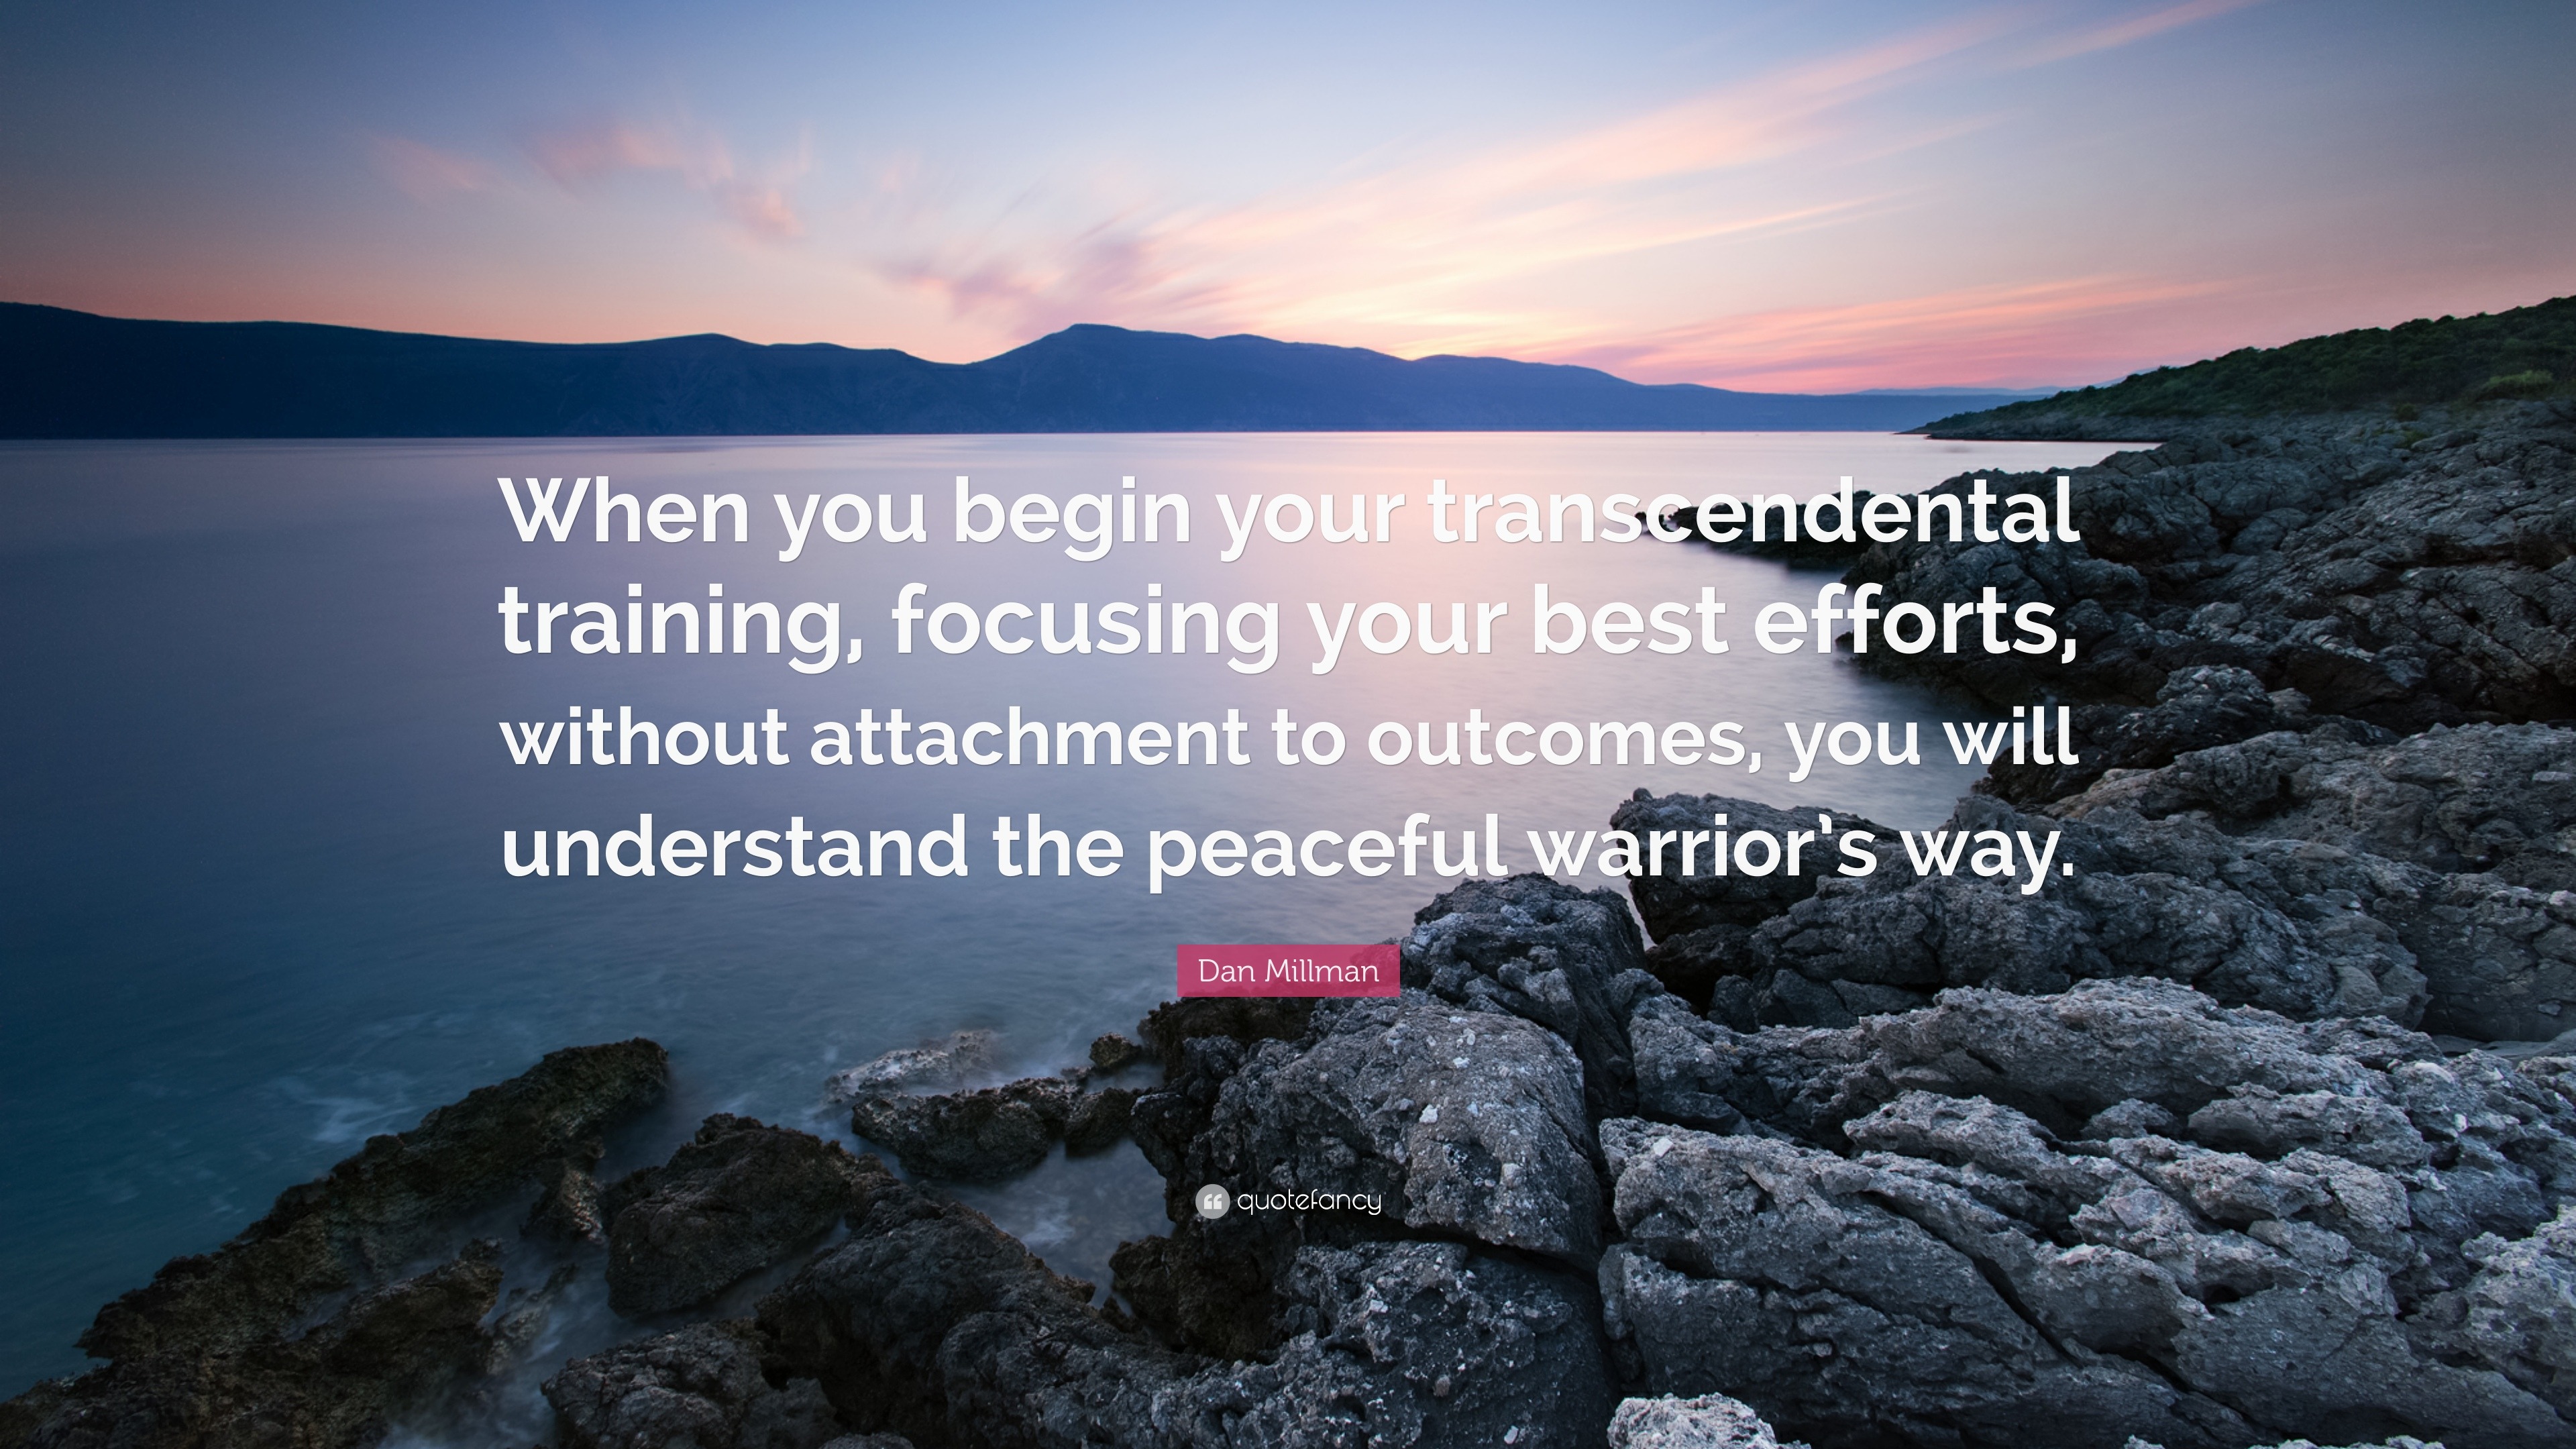 the way of the peaceful warrior